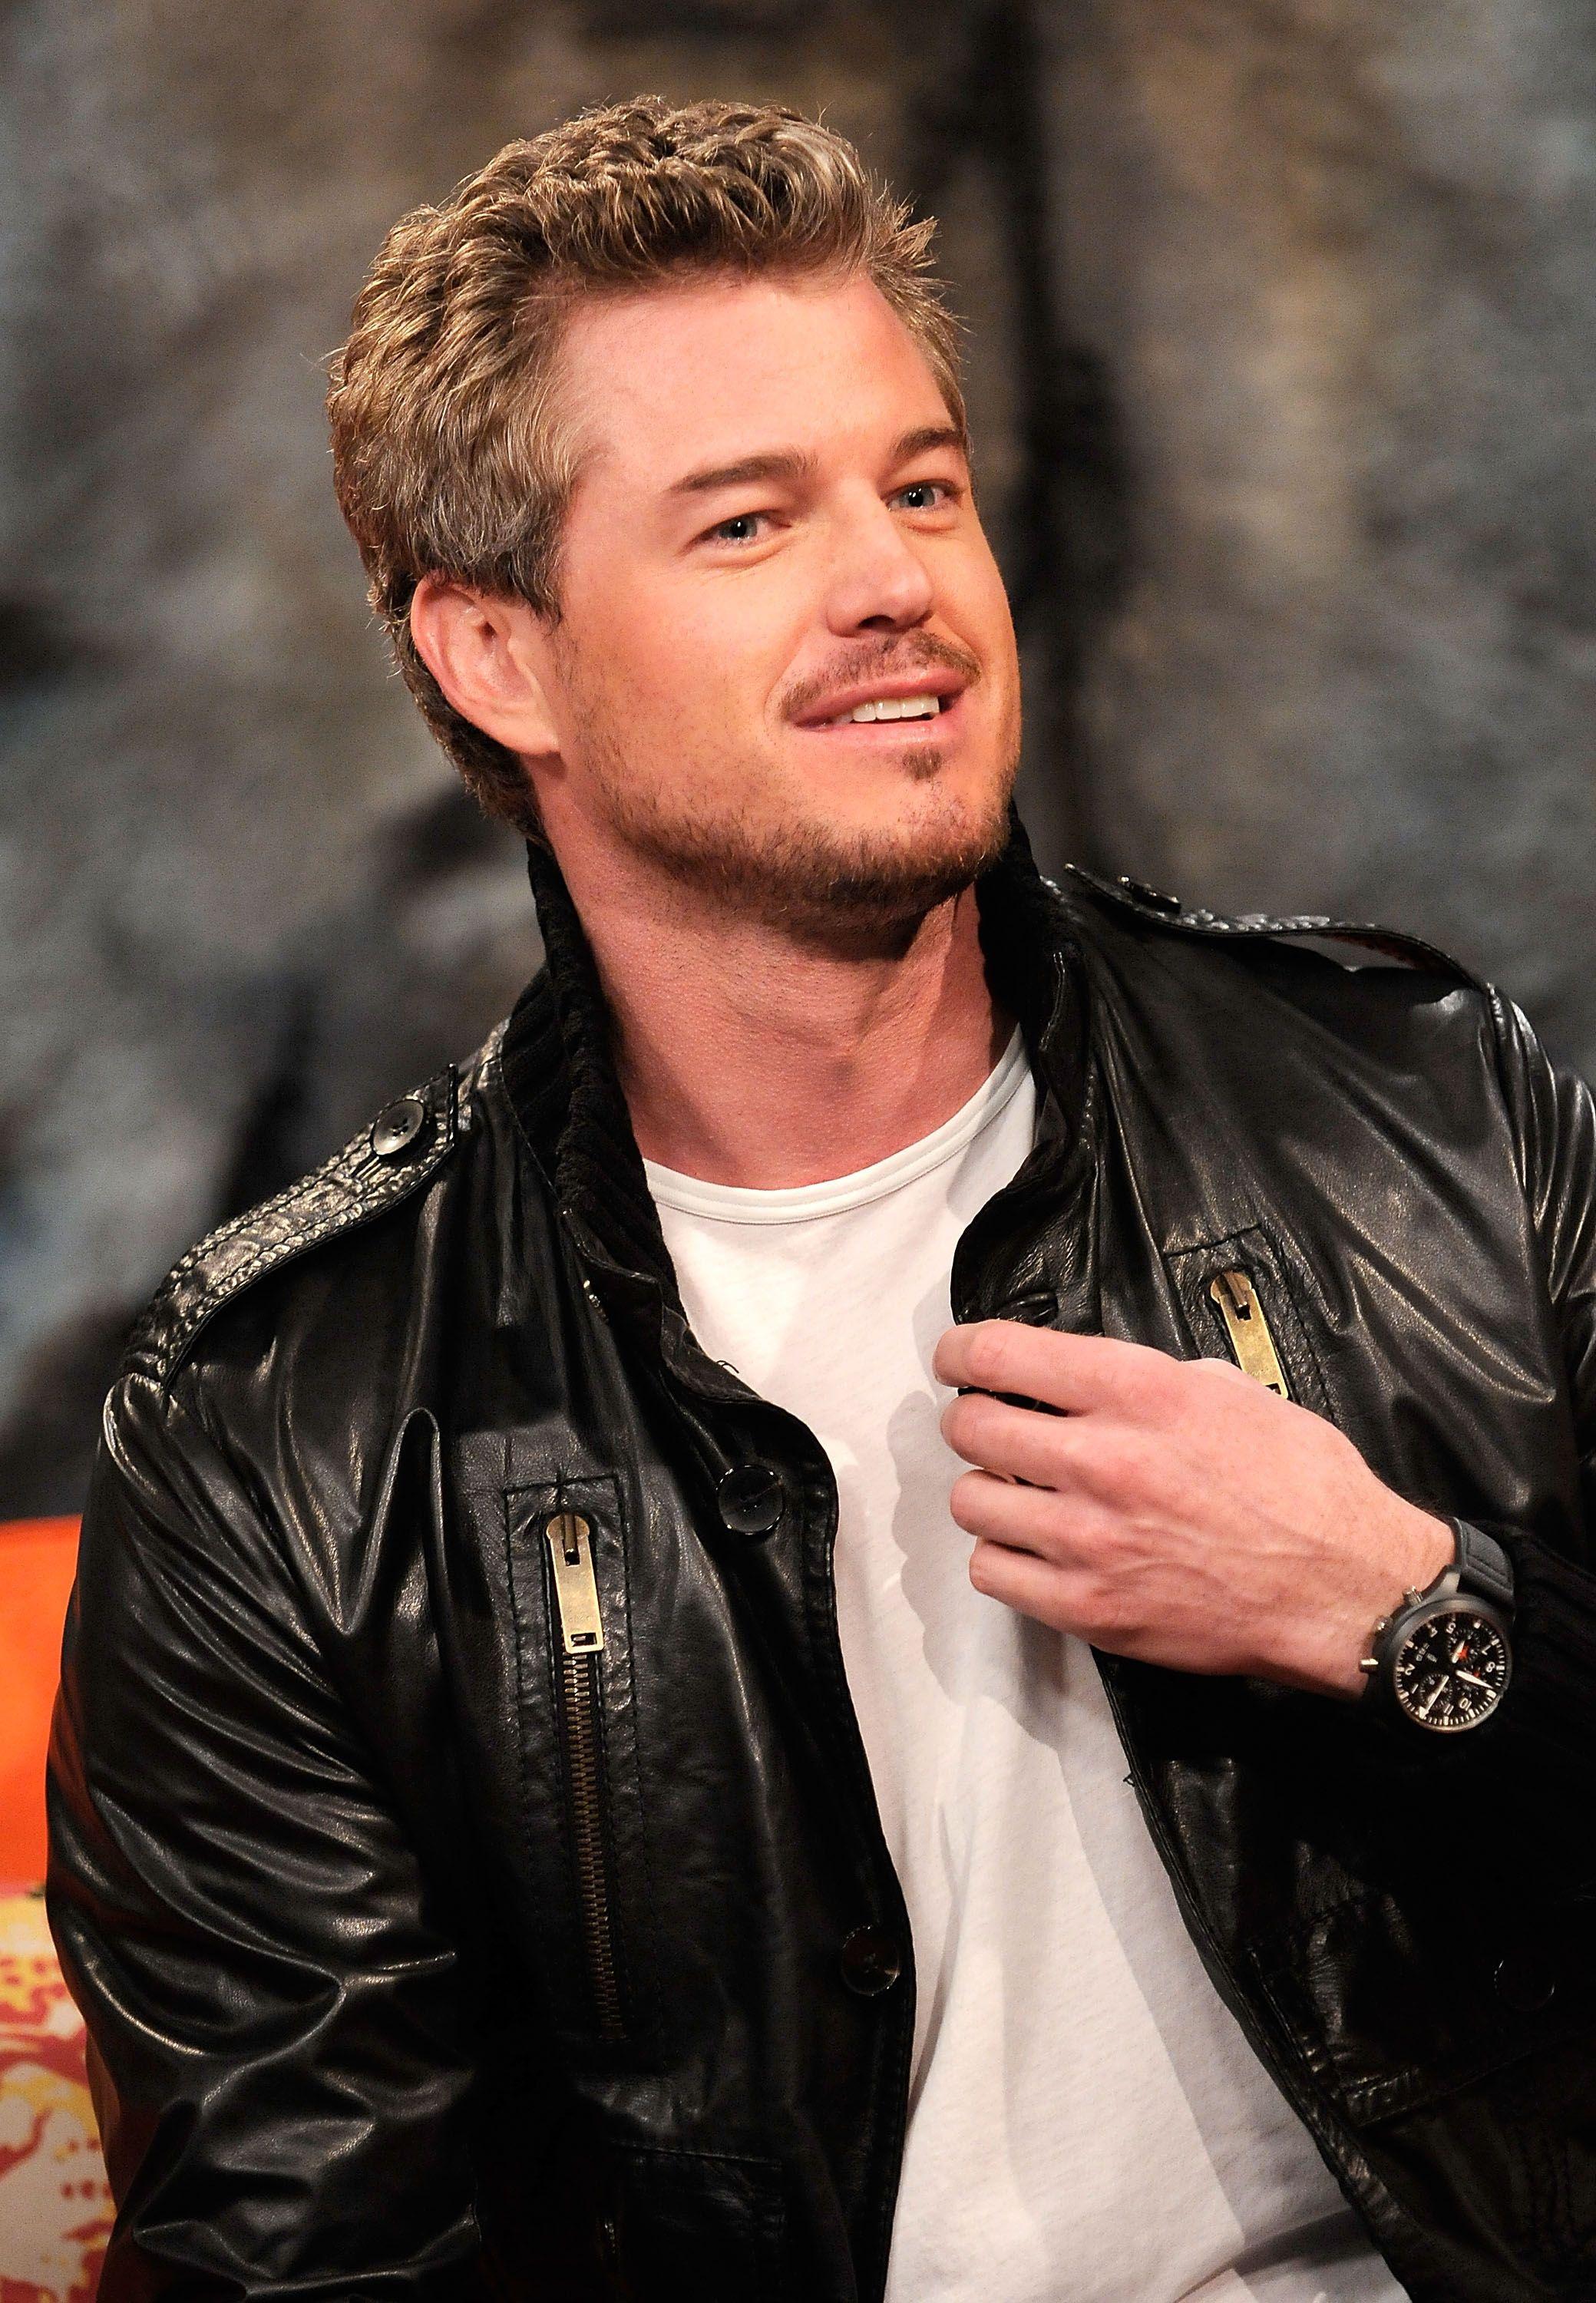 McSteamy! cannot believe i missed him :O Eric Dane. The Cool Kids